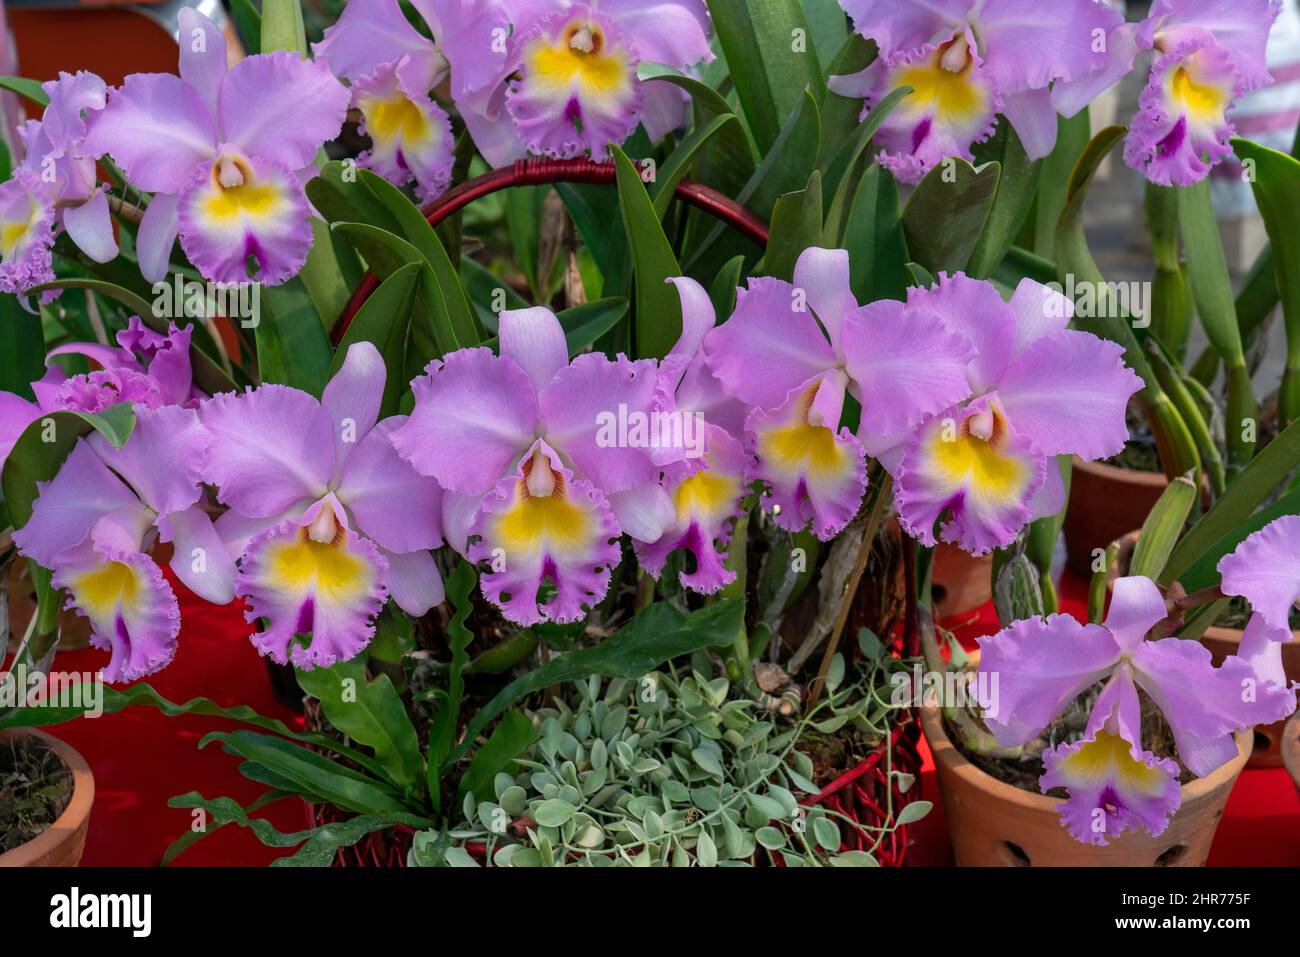 Pink cattleya flowers,Isolated pink color flowers blooming bouquet. Wild cattleya orchid plant growing in pot for home care. Stock Photo